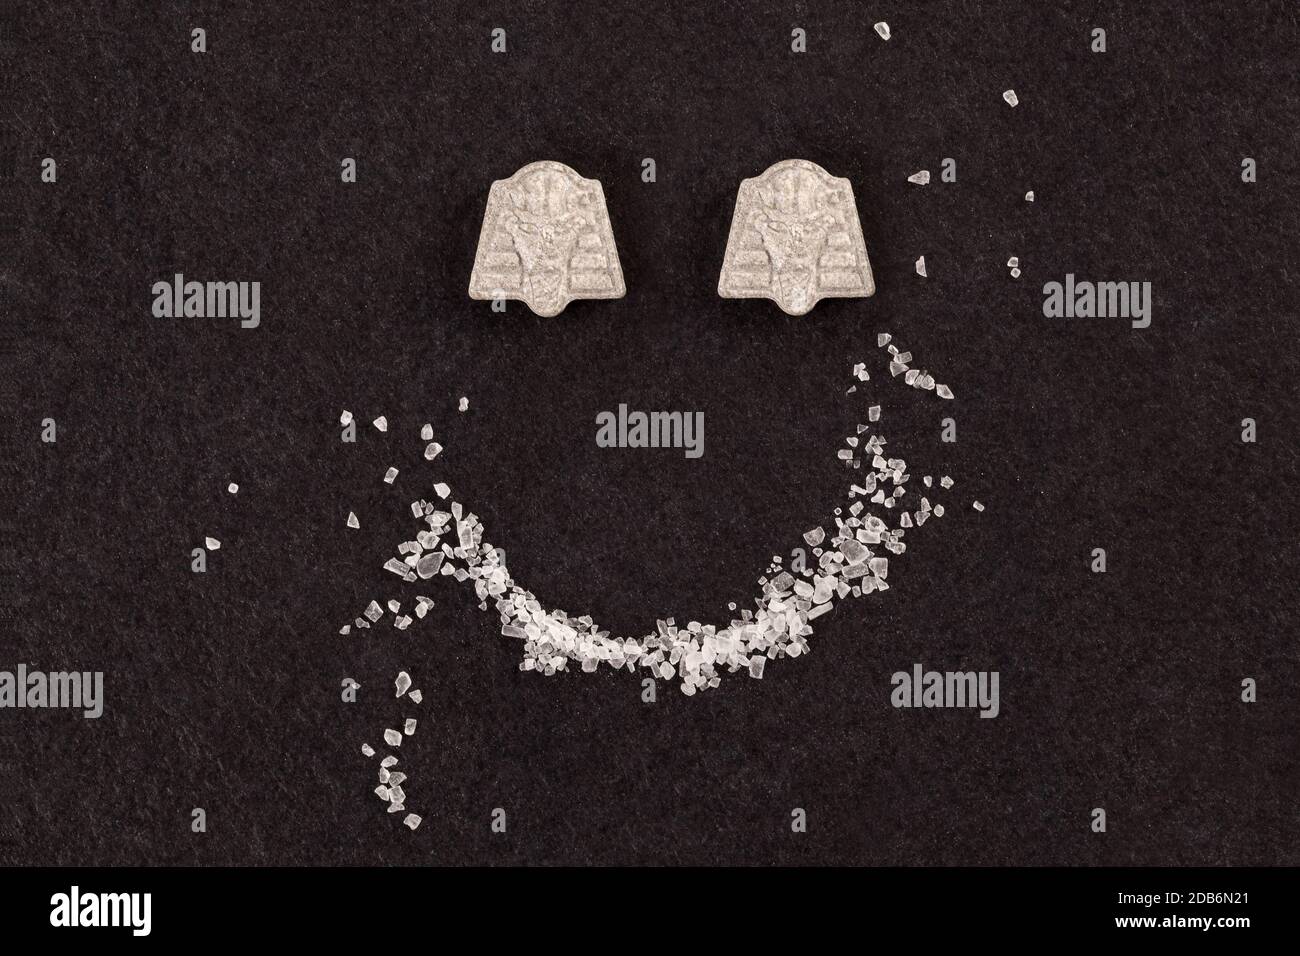 MDMA crystal and ecstasy pills forming smiley face. Stock Photo